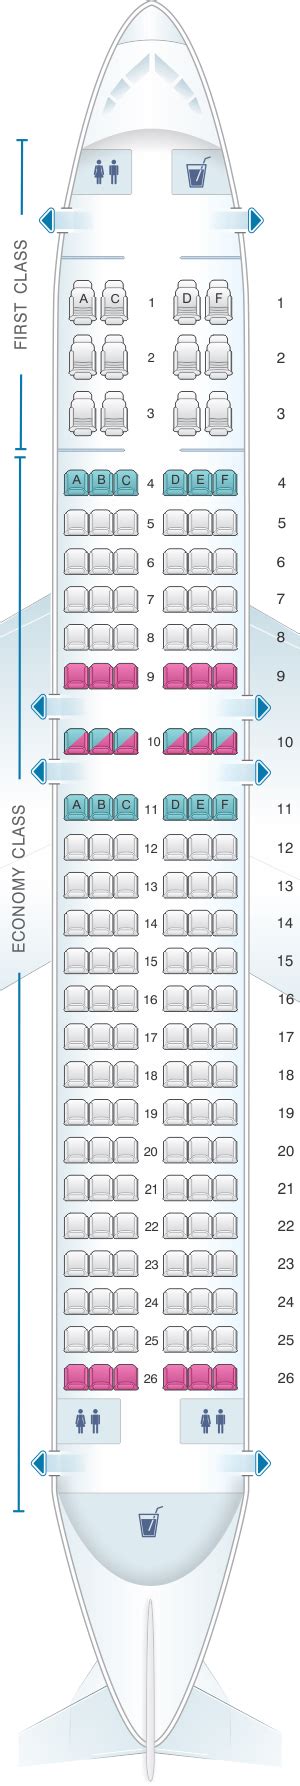 Airbus a320 seat map american airlines. Planes & Seat Maps > Airbus A320 (320) Avianca Seat Maps. Airbus A320 (320) Overview; Planes & Seat Maps. Airbus A318 (318) Airbus A319 (319) Airbus A320 (320) Airbus A321 (321) ... This is Awful compared to other airlines such as: LAN Airlines where I call advance reserved my seats. 